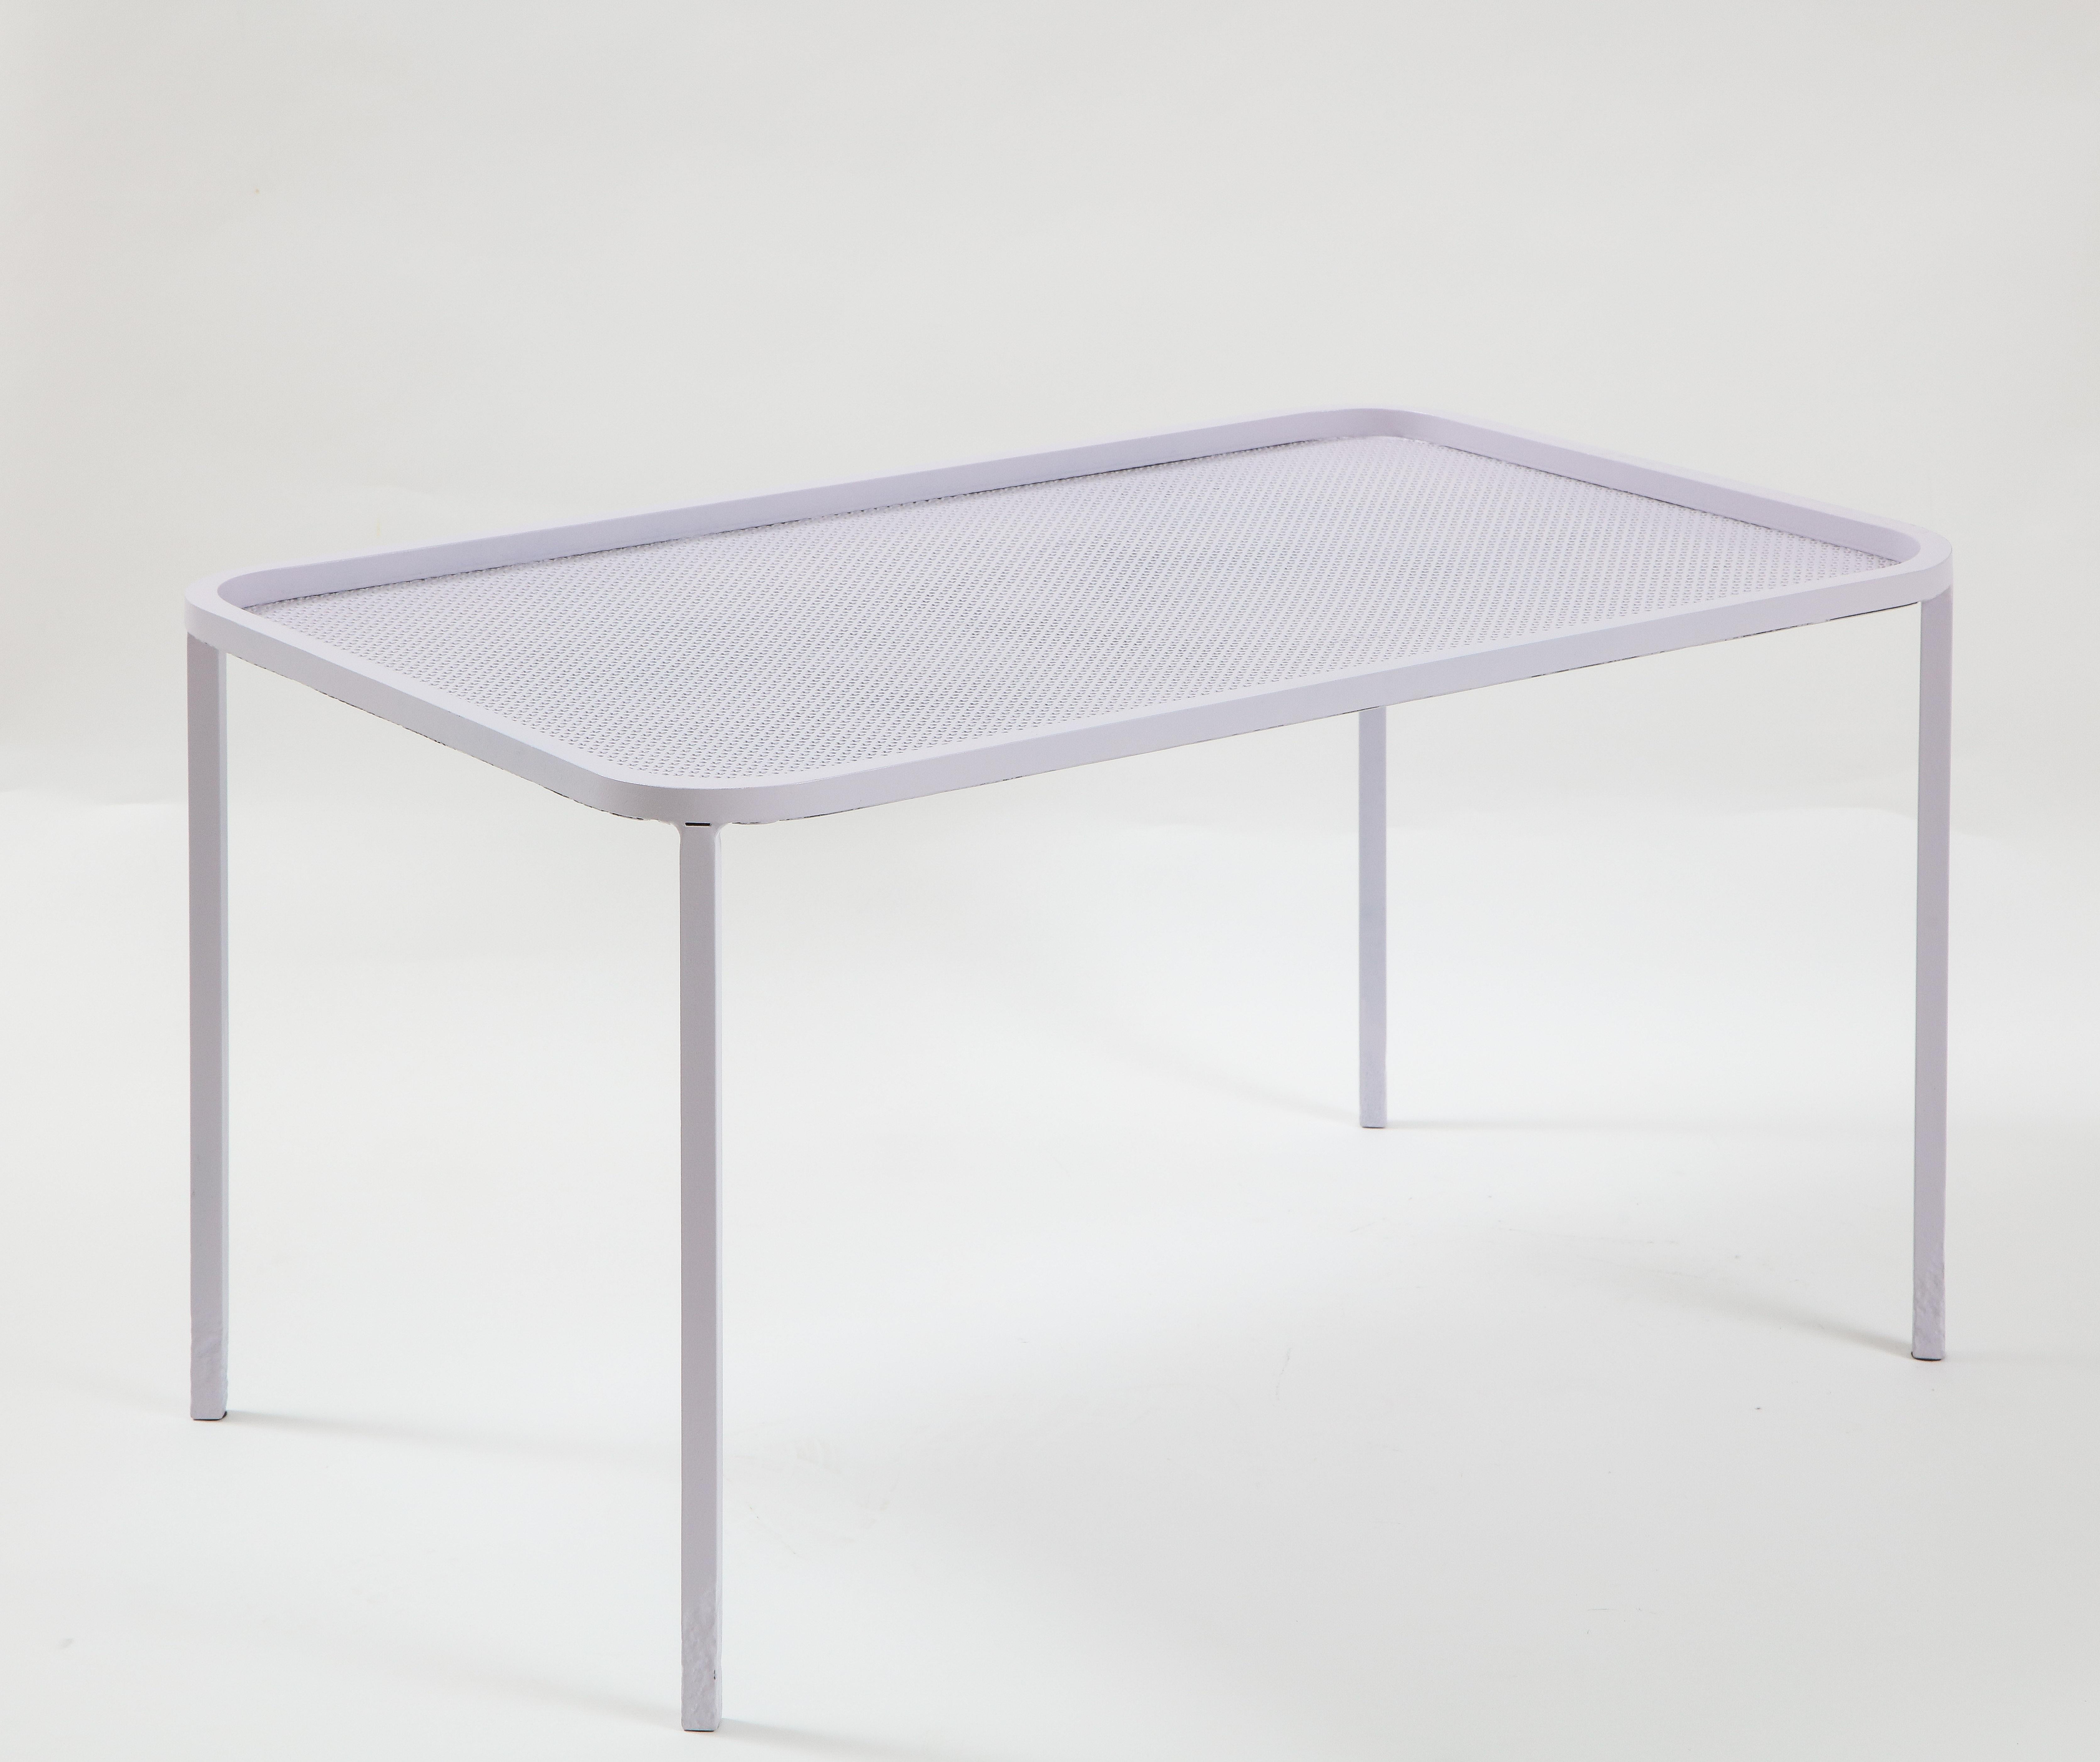 Mathieu Matégot white rectangular perforated metal coffee table, France, mid-20th century

Simple yet elegant design consists of a perforated metal table top, clean curvilinear edge, and sleek legs. This table has refinished and is in fantastic